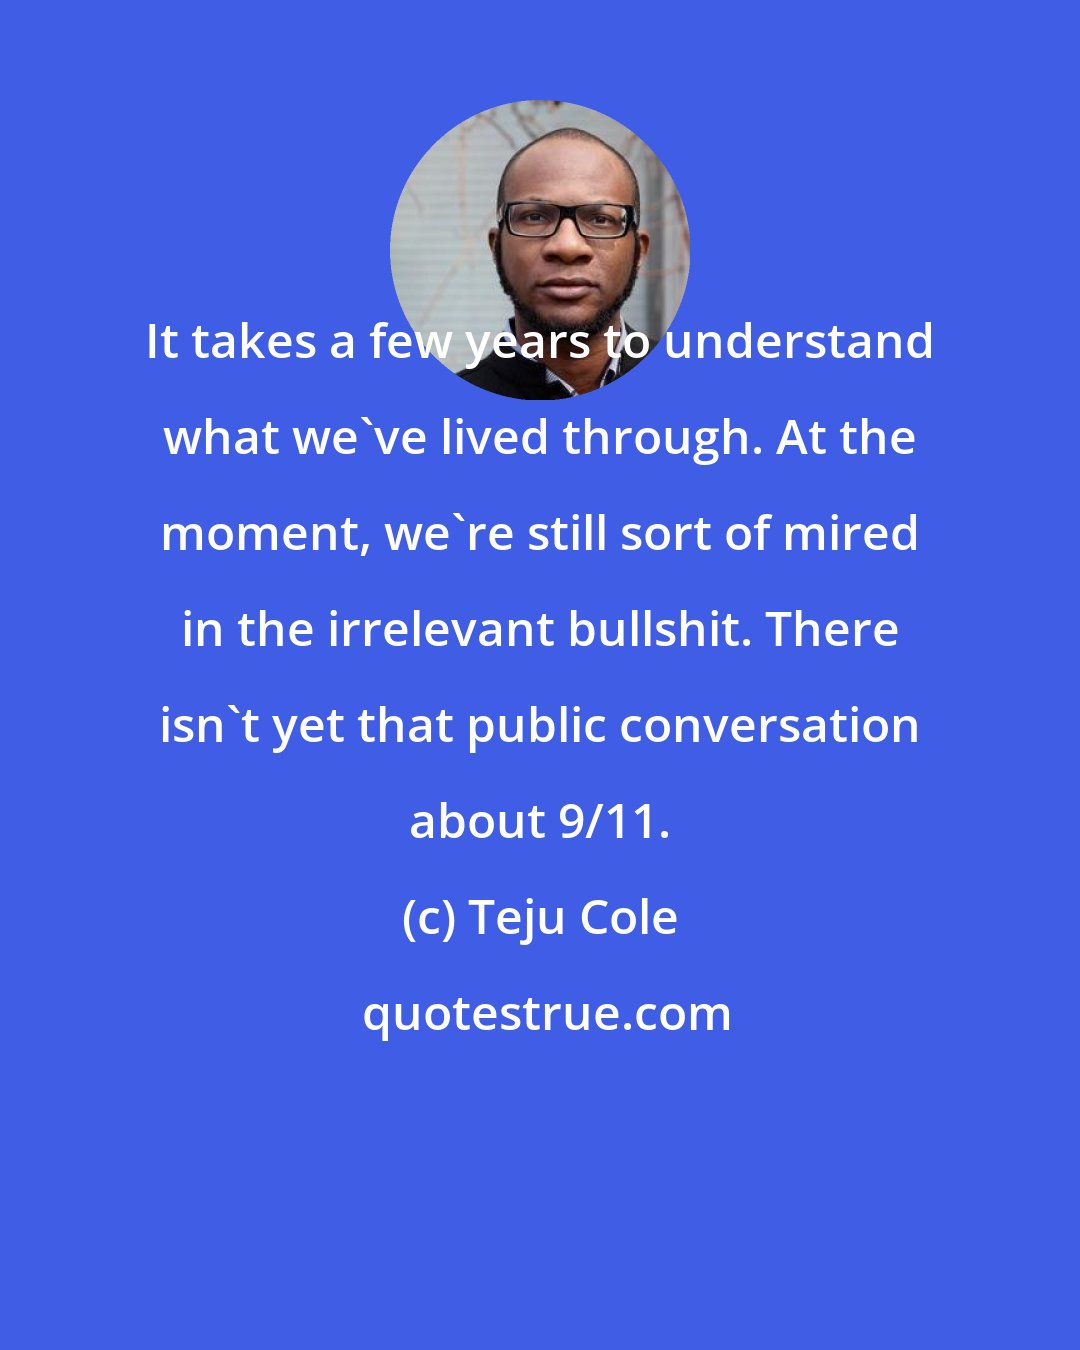 Teju Cole: It takes a few years to understand what we've lived through. At the moment, we're still sort of mired in the irrelevant bullshit. There isn't yet that public conversation about 9/11.